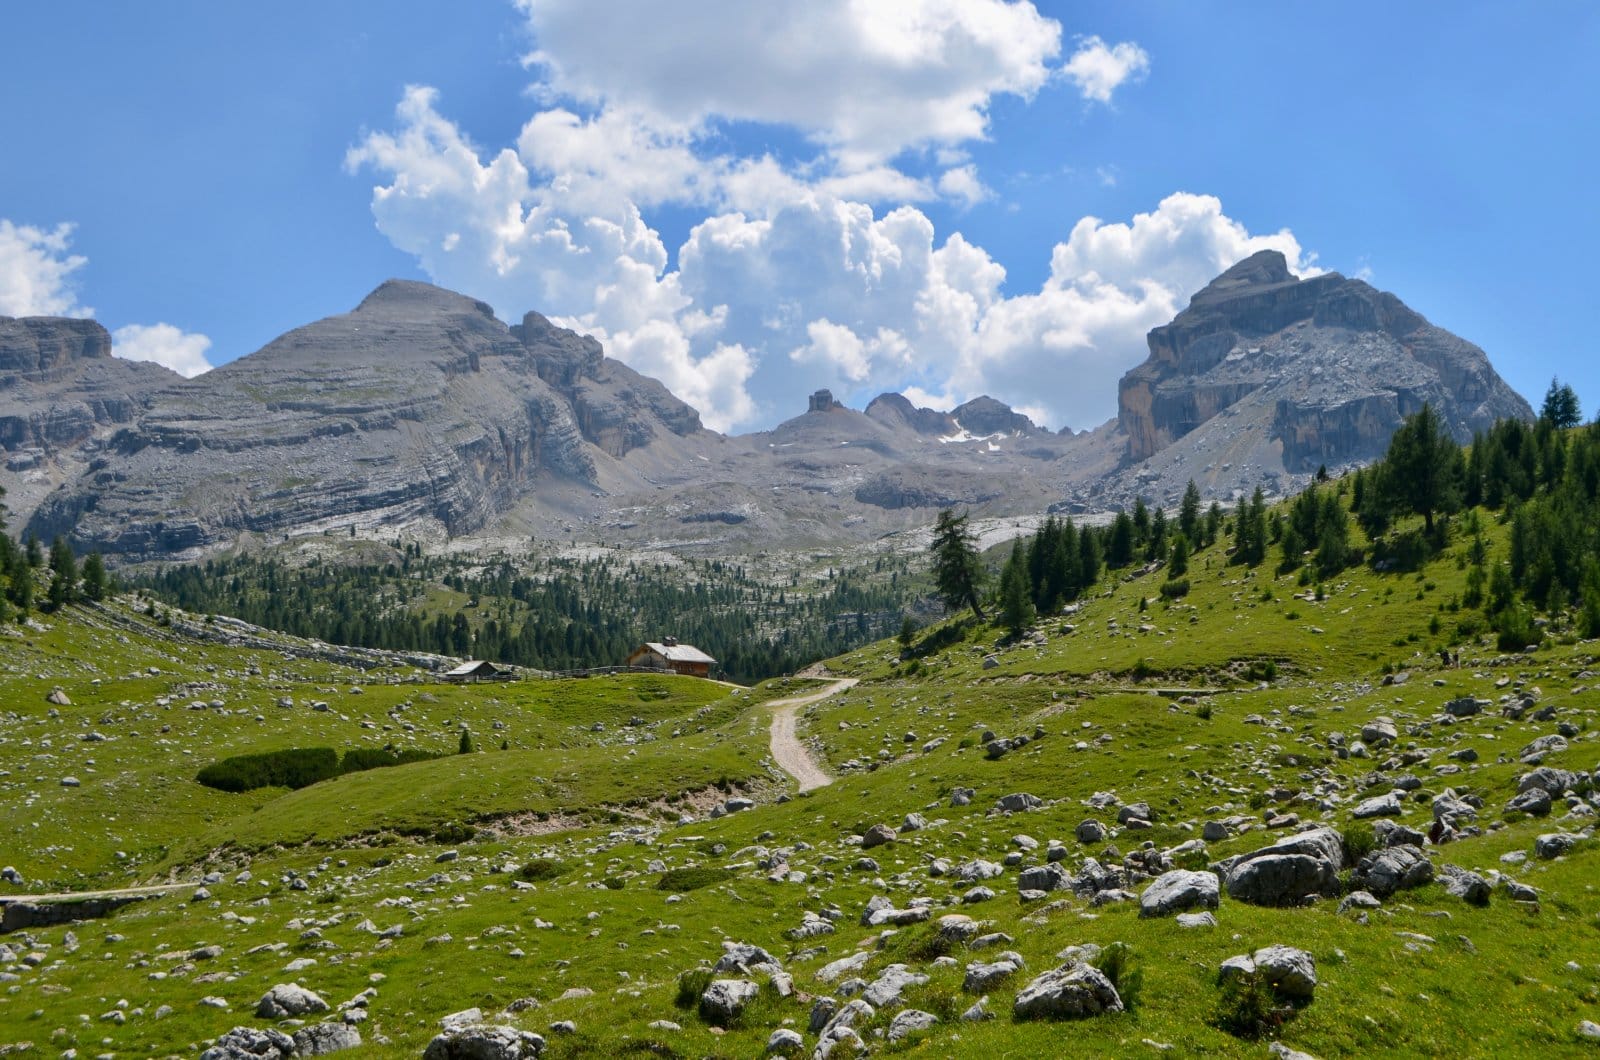 <p class="wp-caption-text">Image Credit: Shutterstock / Fraank</p>  <p><span>This natural park encompasses a vast area of the Dolomites, featuring a diverse landscape of high-altitude plateaus, serene alpine lakes, and dense forests. It’s a haven for hikers, with trails leading to remote mountain huts, dramatic viewpoints, and tranquil lakes. The park is also rich in wildlife and flora, offering chances to spot marmots, eagles, and a variety of alpine plants.</span></p>